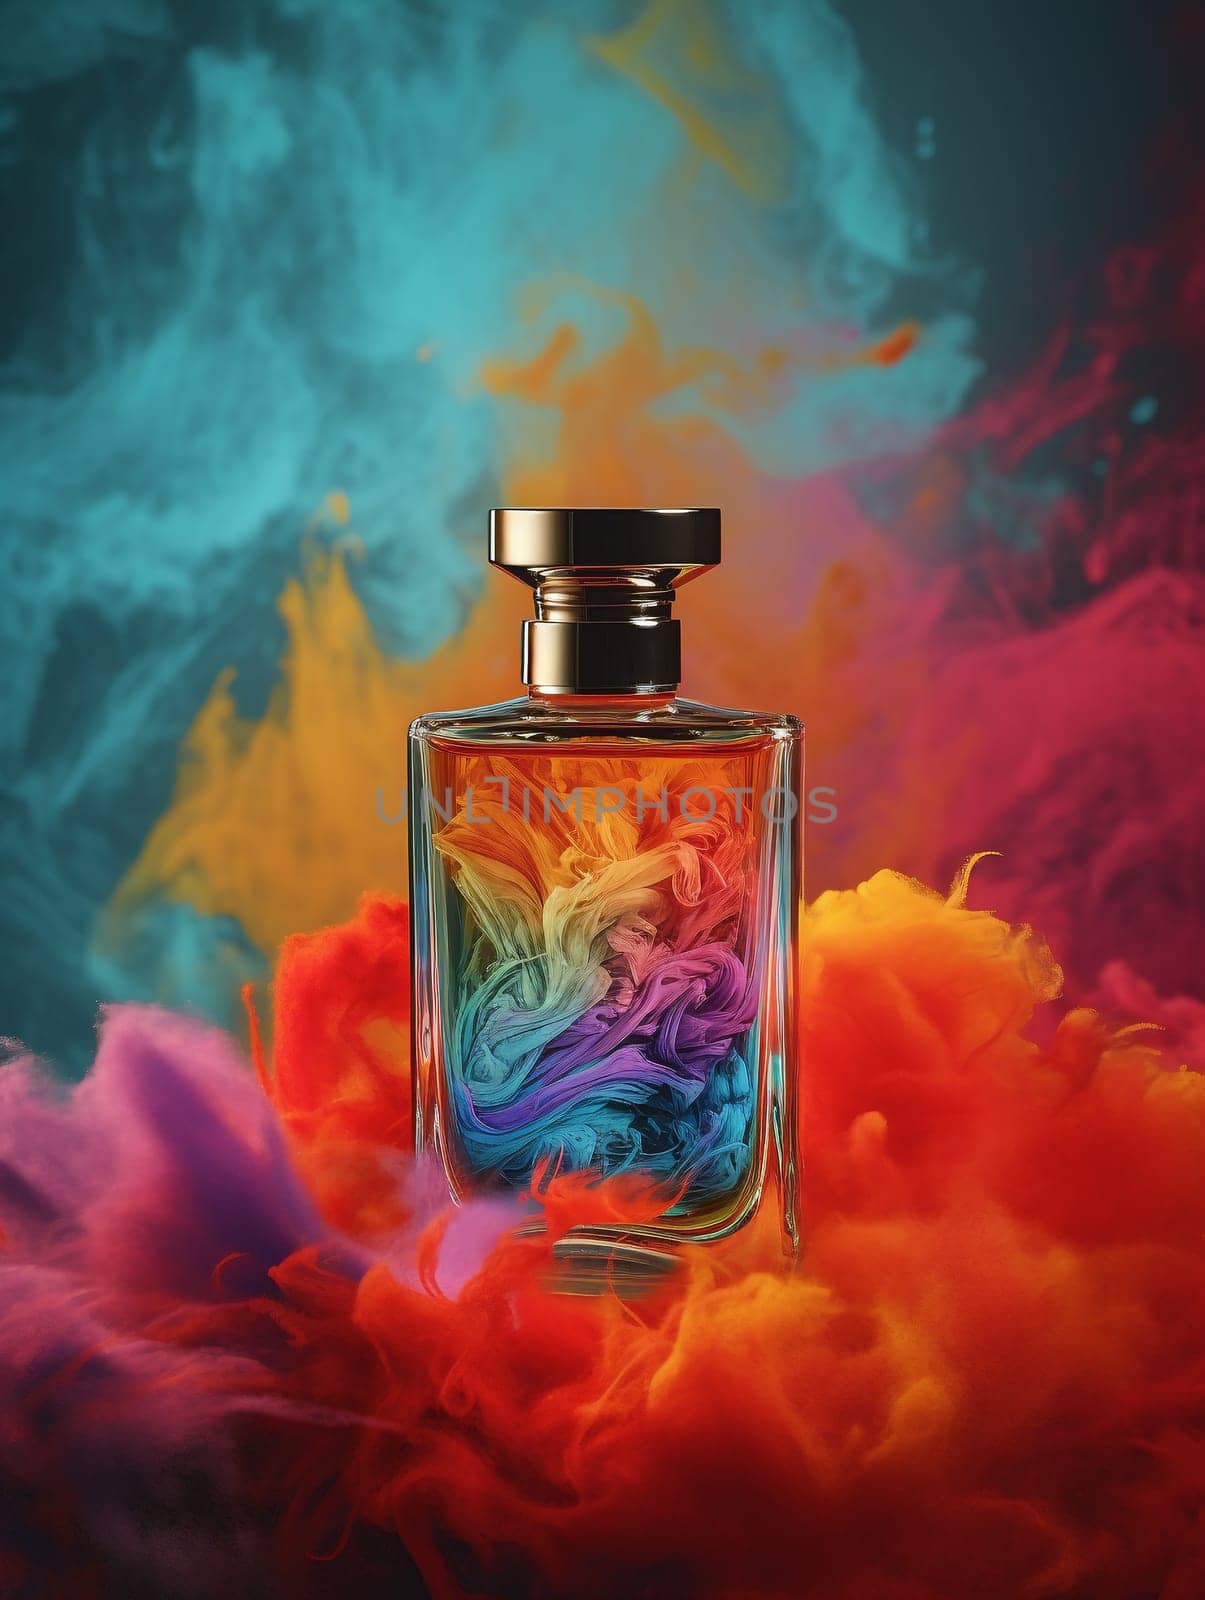 A bottle of perfume in emerging from a colorful smoke by chrisroll